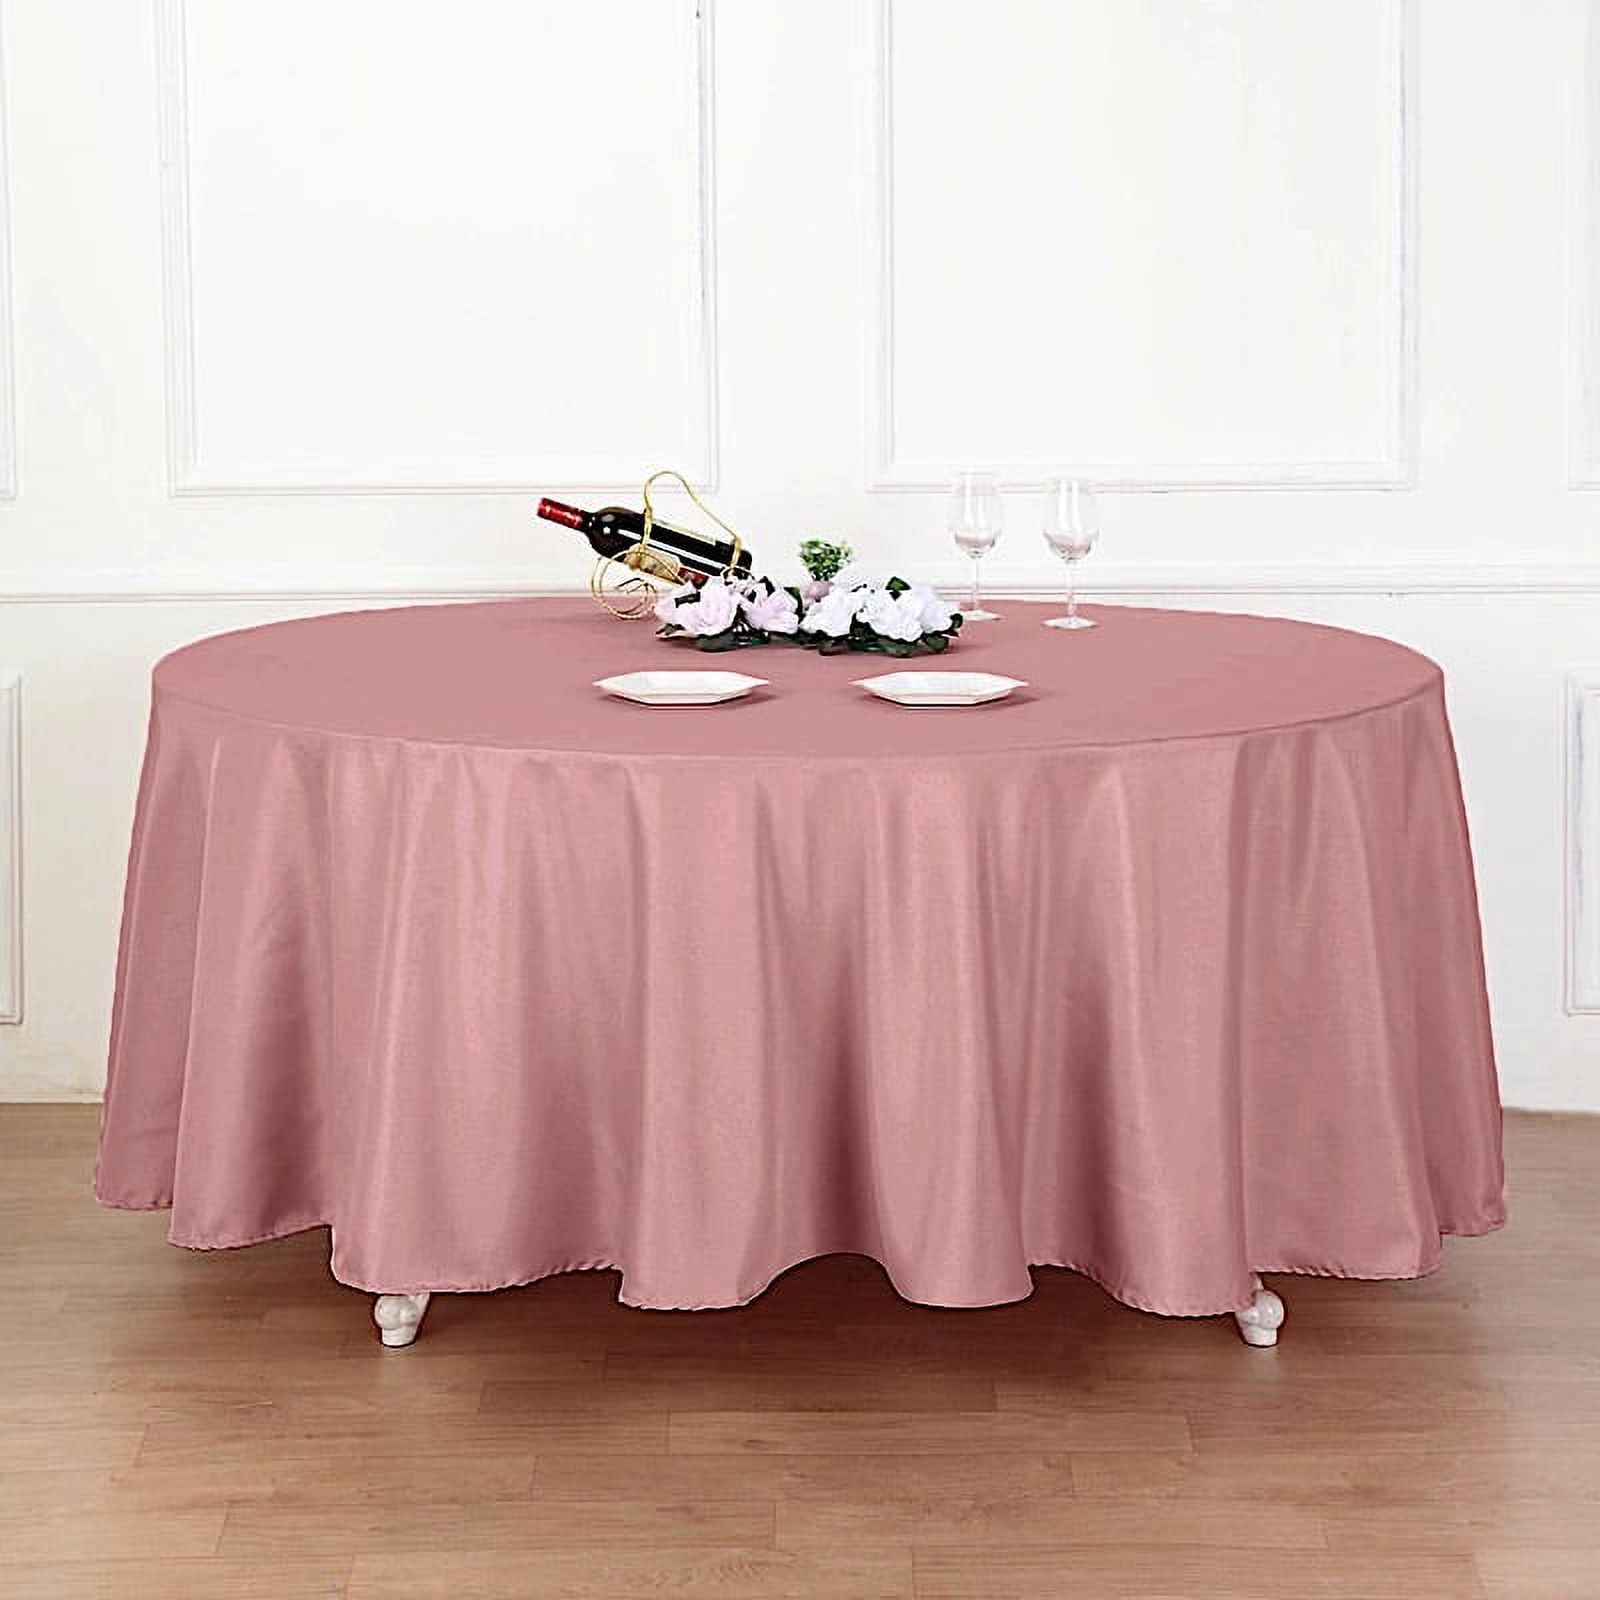 BalsaCircle 120 Dusty Rose Round Polyester Tablecloth Wedding Table Linens  